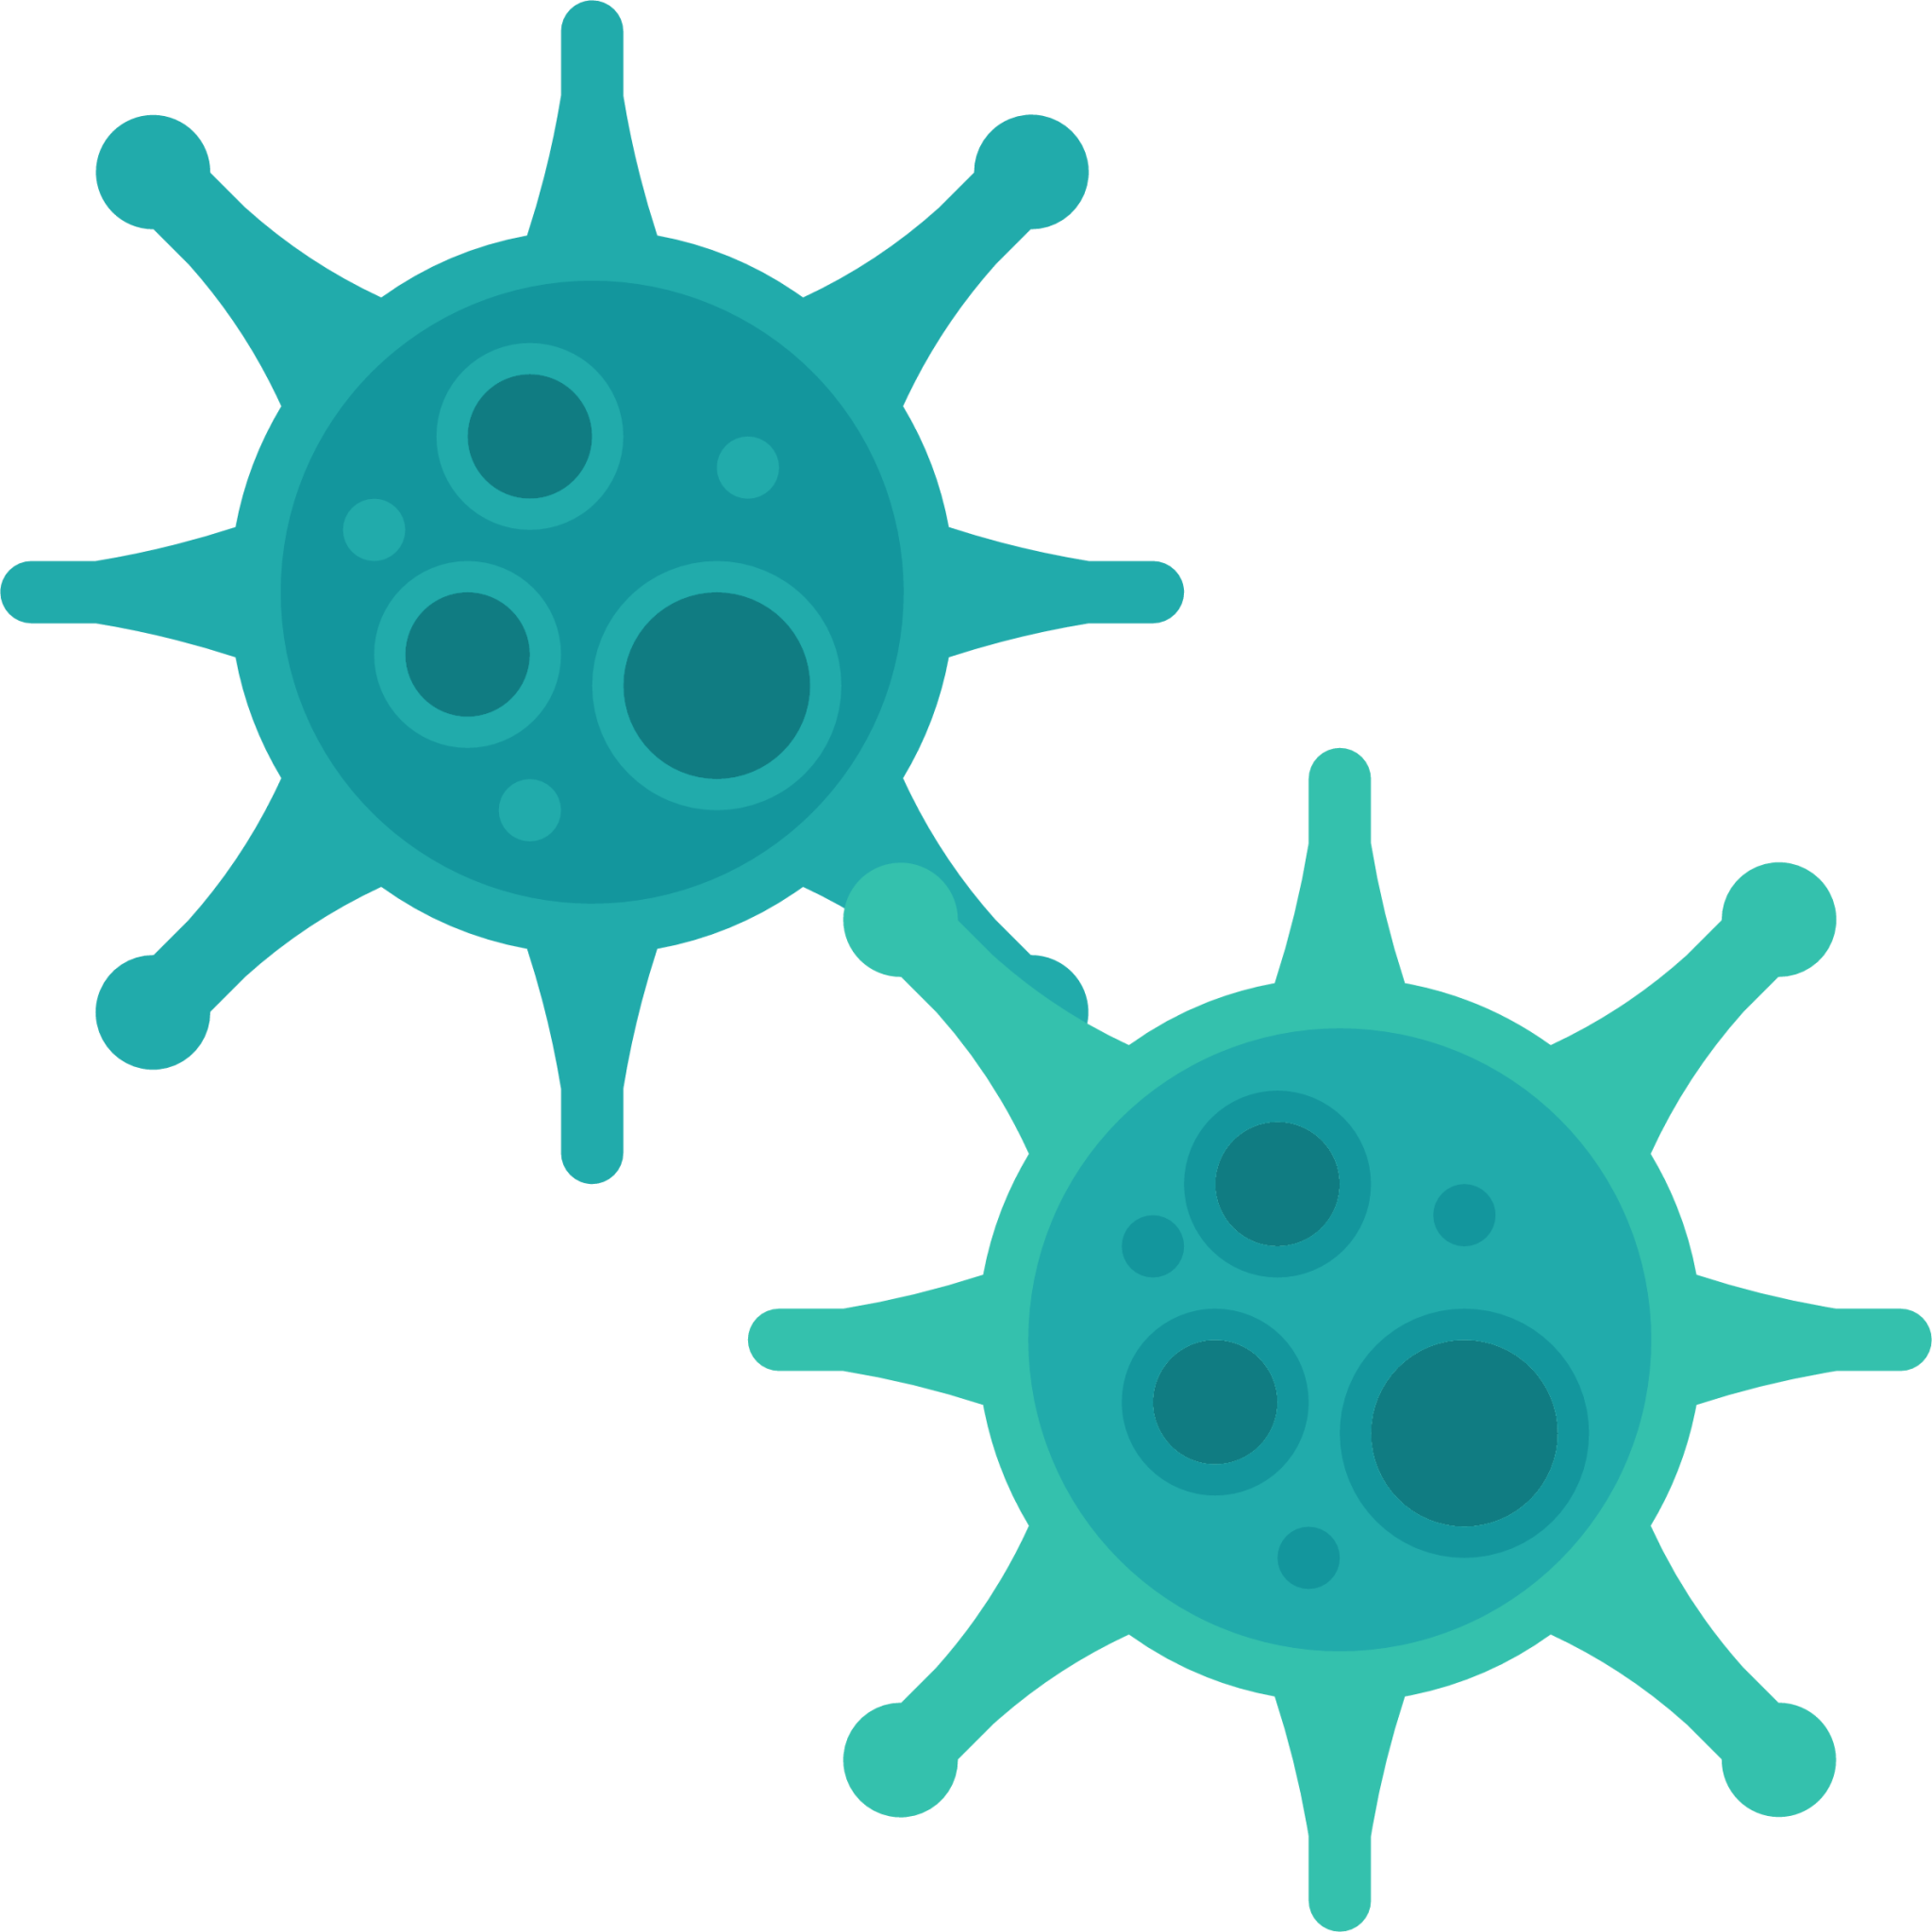 bacteria cell infection virus illustration